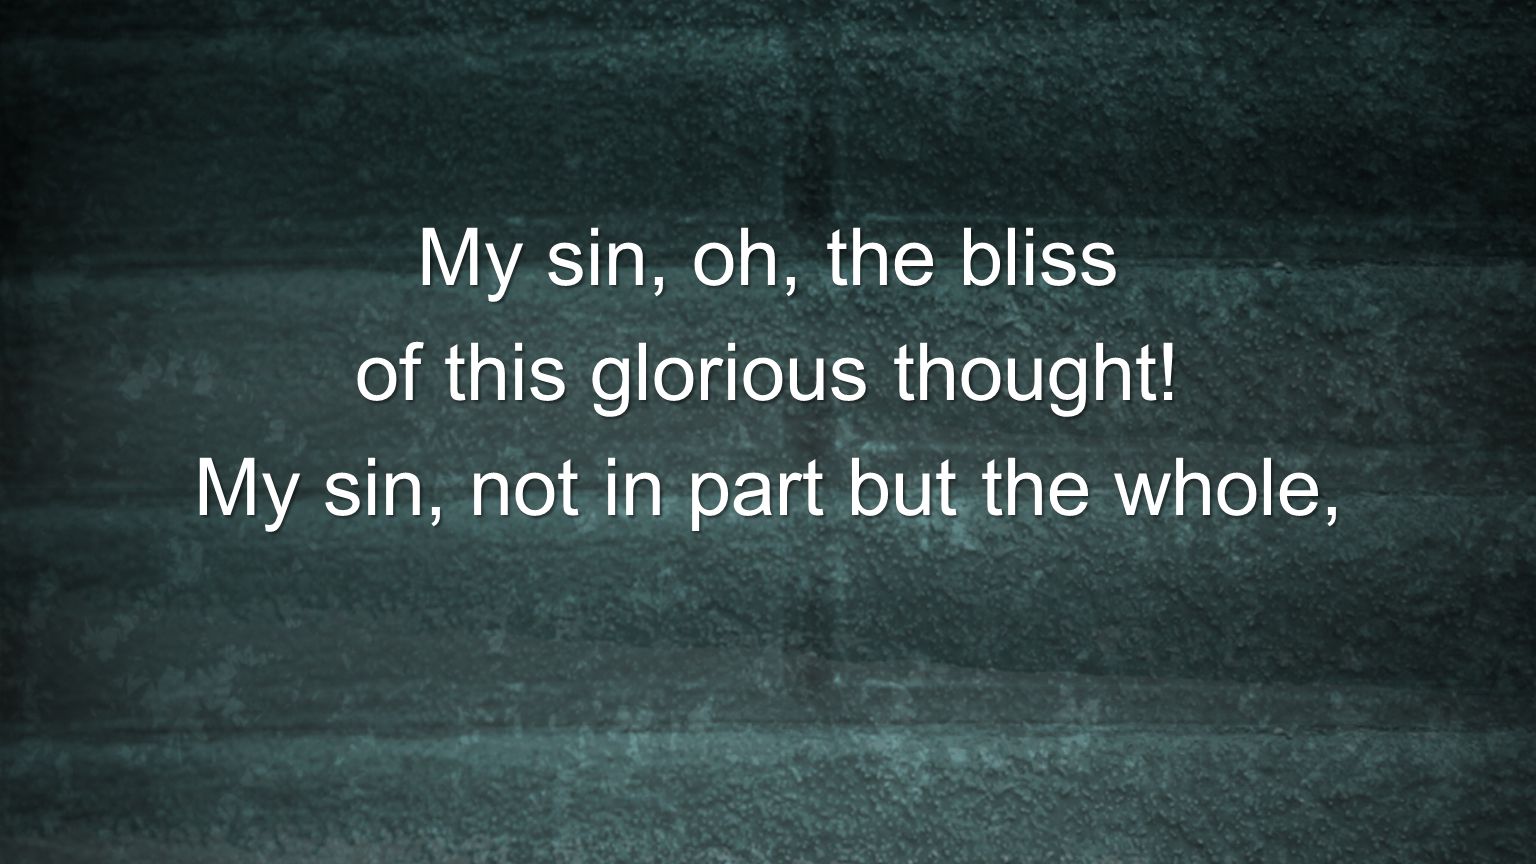 of this glorious thought! My sin, not in part but the whole,